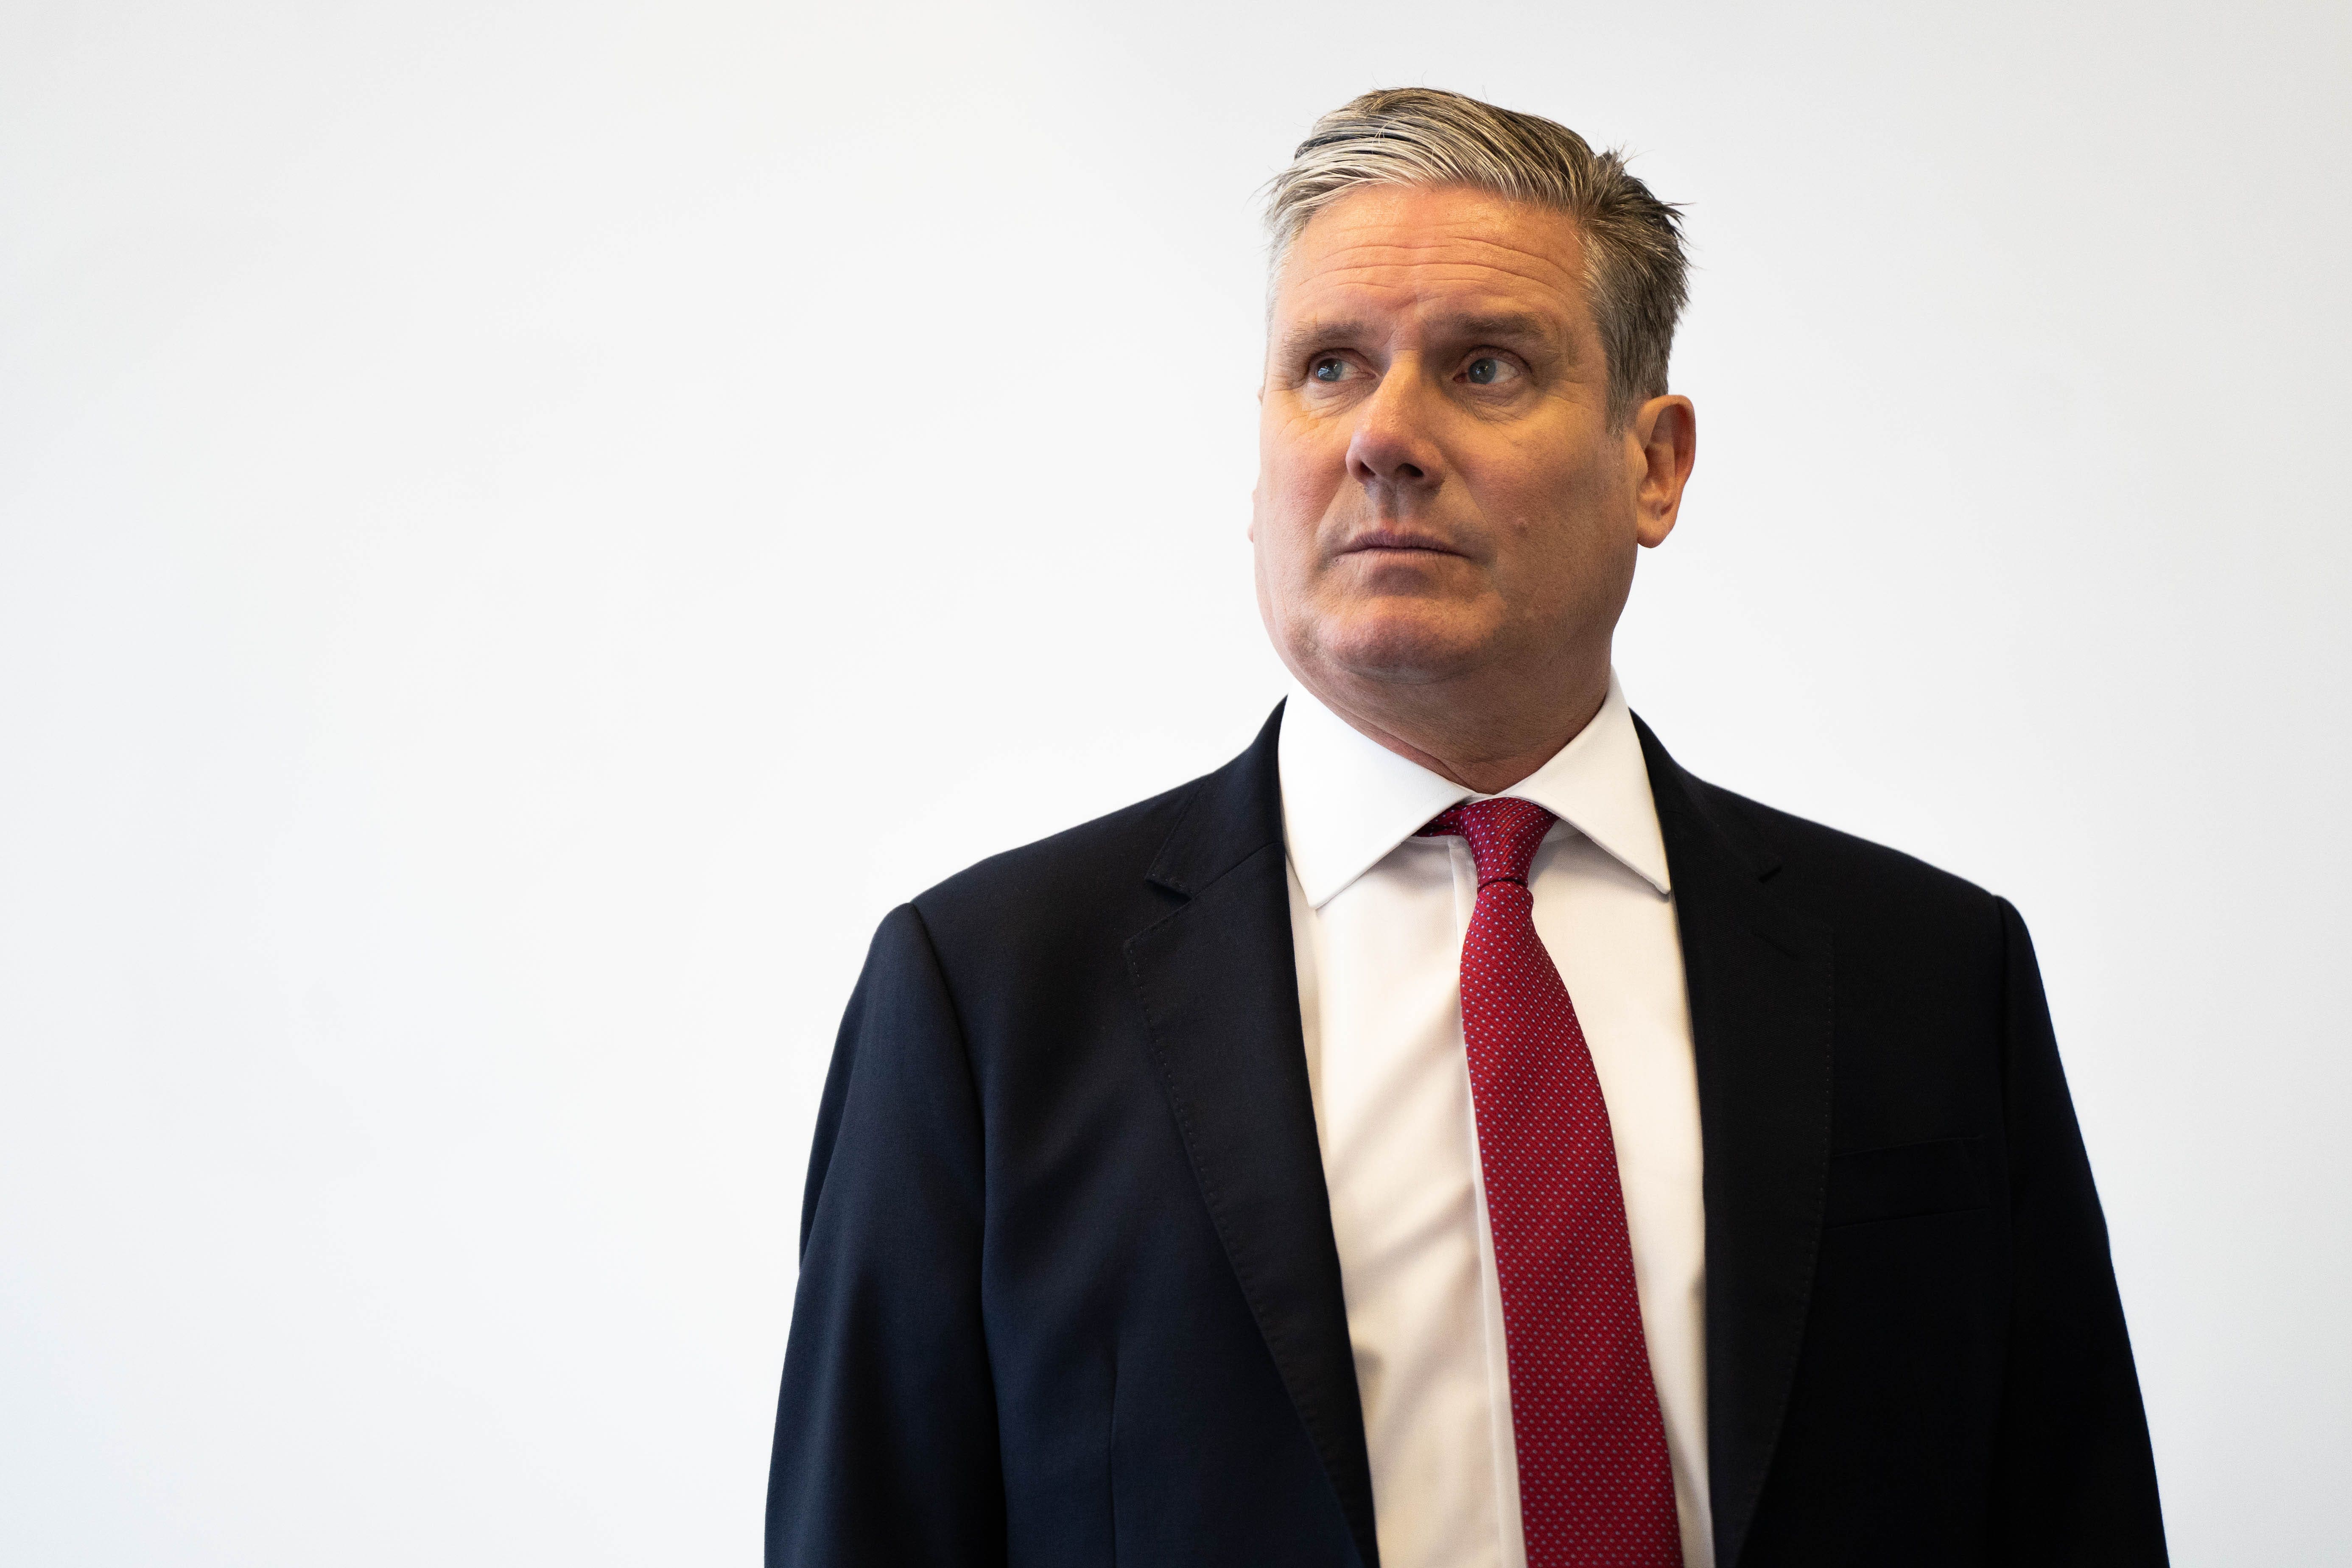 Labour leader Sir Keir Starmer Sir Keir Starmer has met a group of Muslim Labour MPs to discuss his position on the Gaza situation (James Manning/PA)